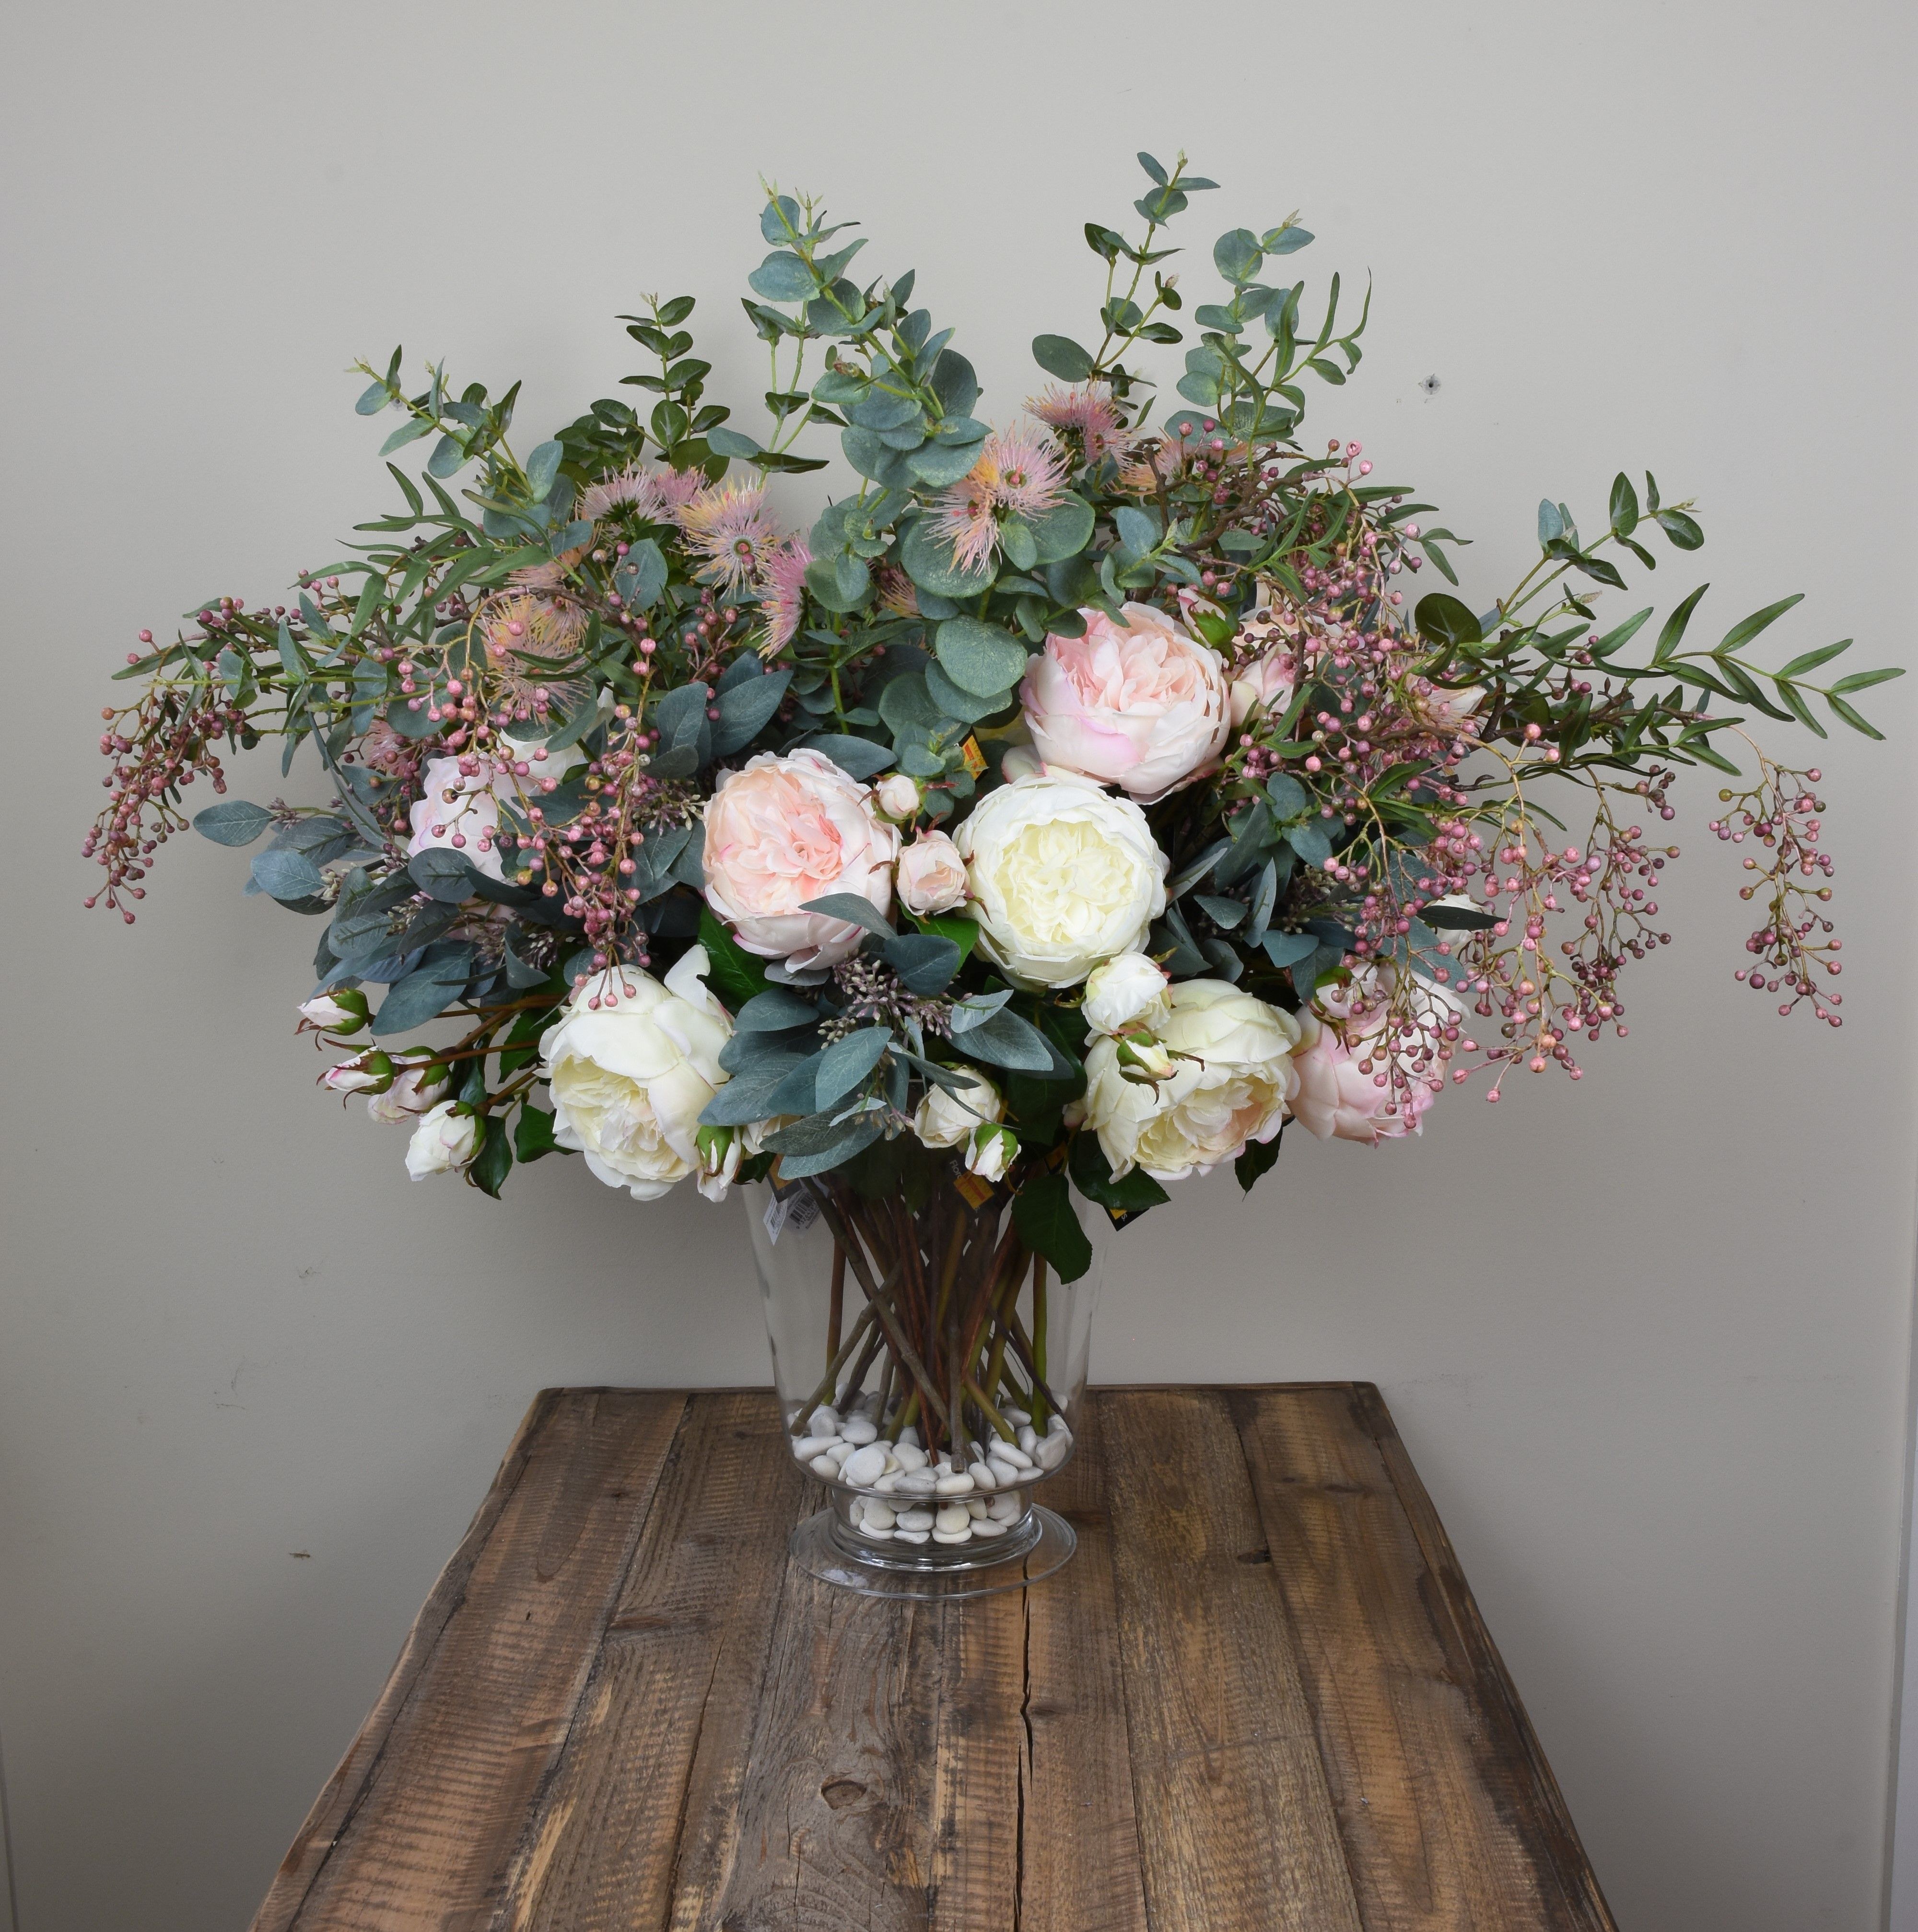 Enhance Your Space with Stunning Artificial Flower Arrangements from Ambermint